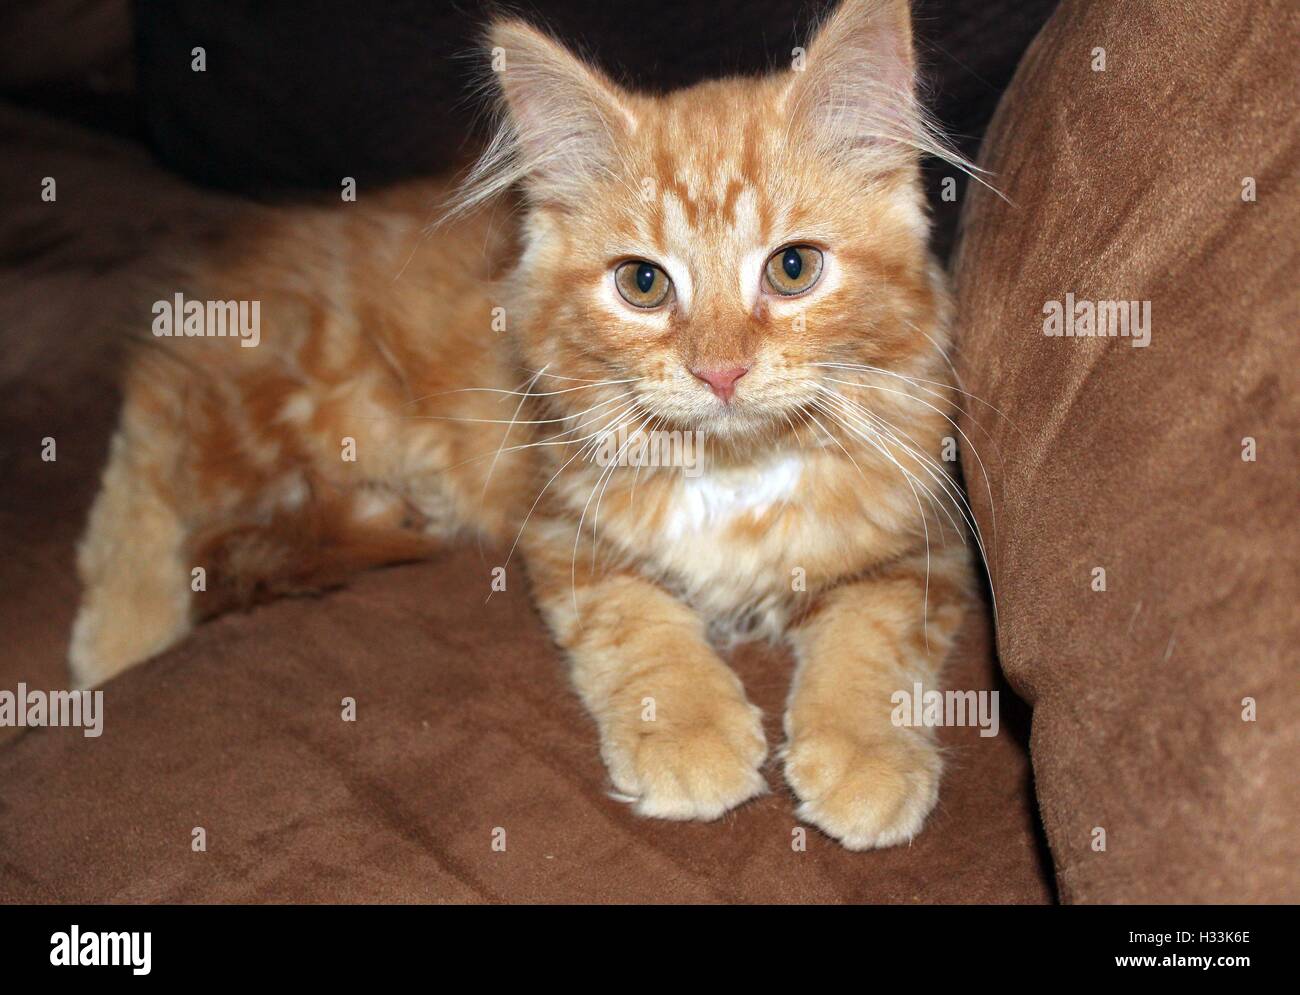 Long Haired Orange Tabby Kitten on a Couch Stock Photo - Alamy